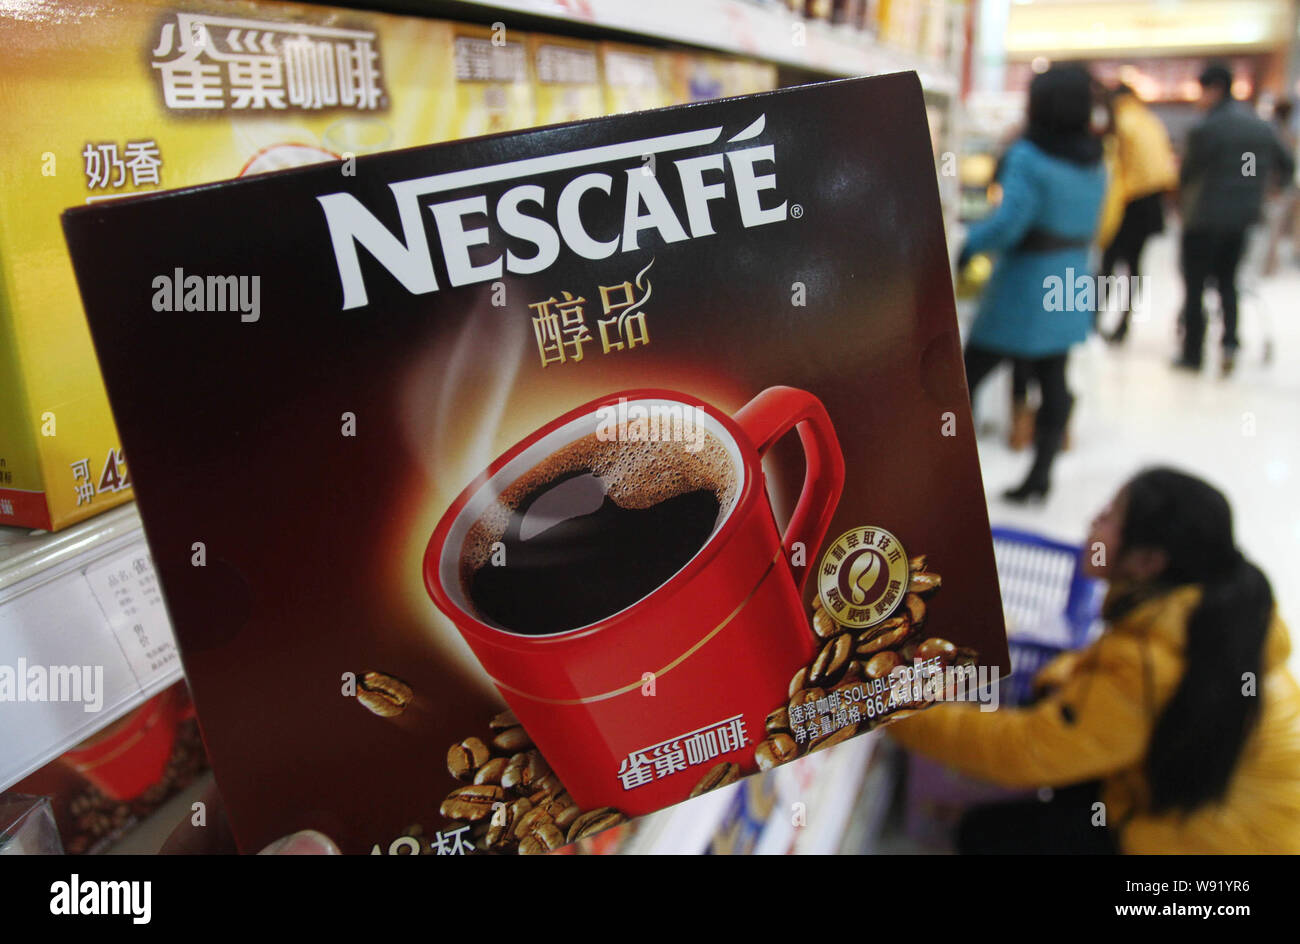 --FILE--Customers buy Nescafe coffee of Nestle at a supermarket in Xuchang city, central Chinas Henan province, 16 February 2013.   Nestle announced p Stock Photo